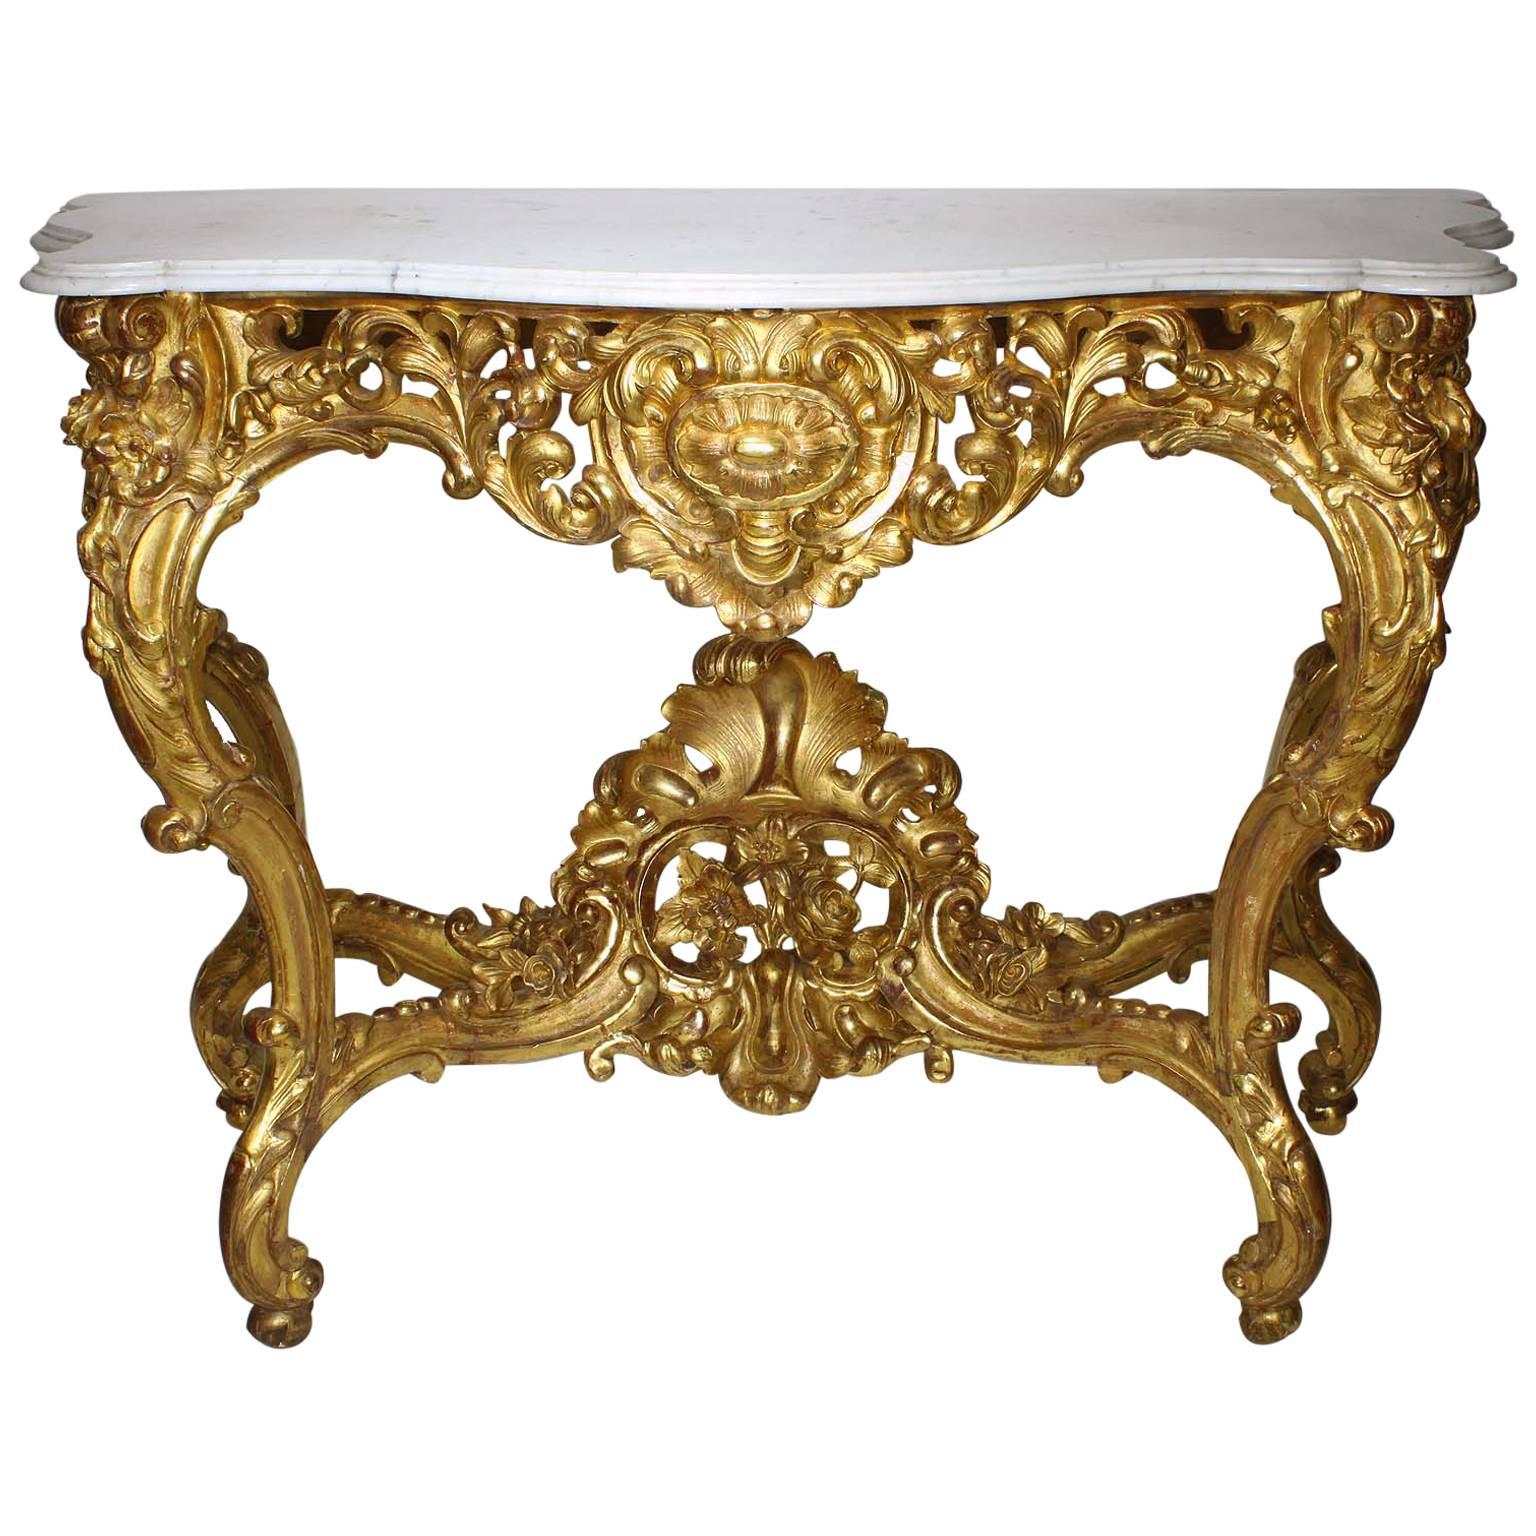 French Belle Époque 19th-20th Century, Louis XV Style Giltwood Carved Console